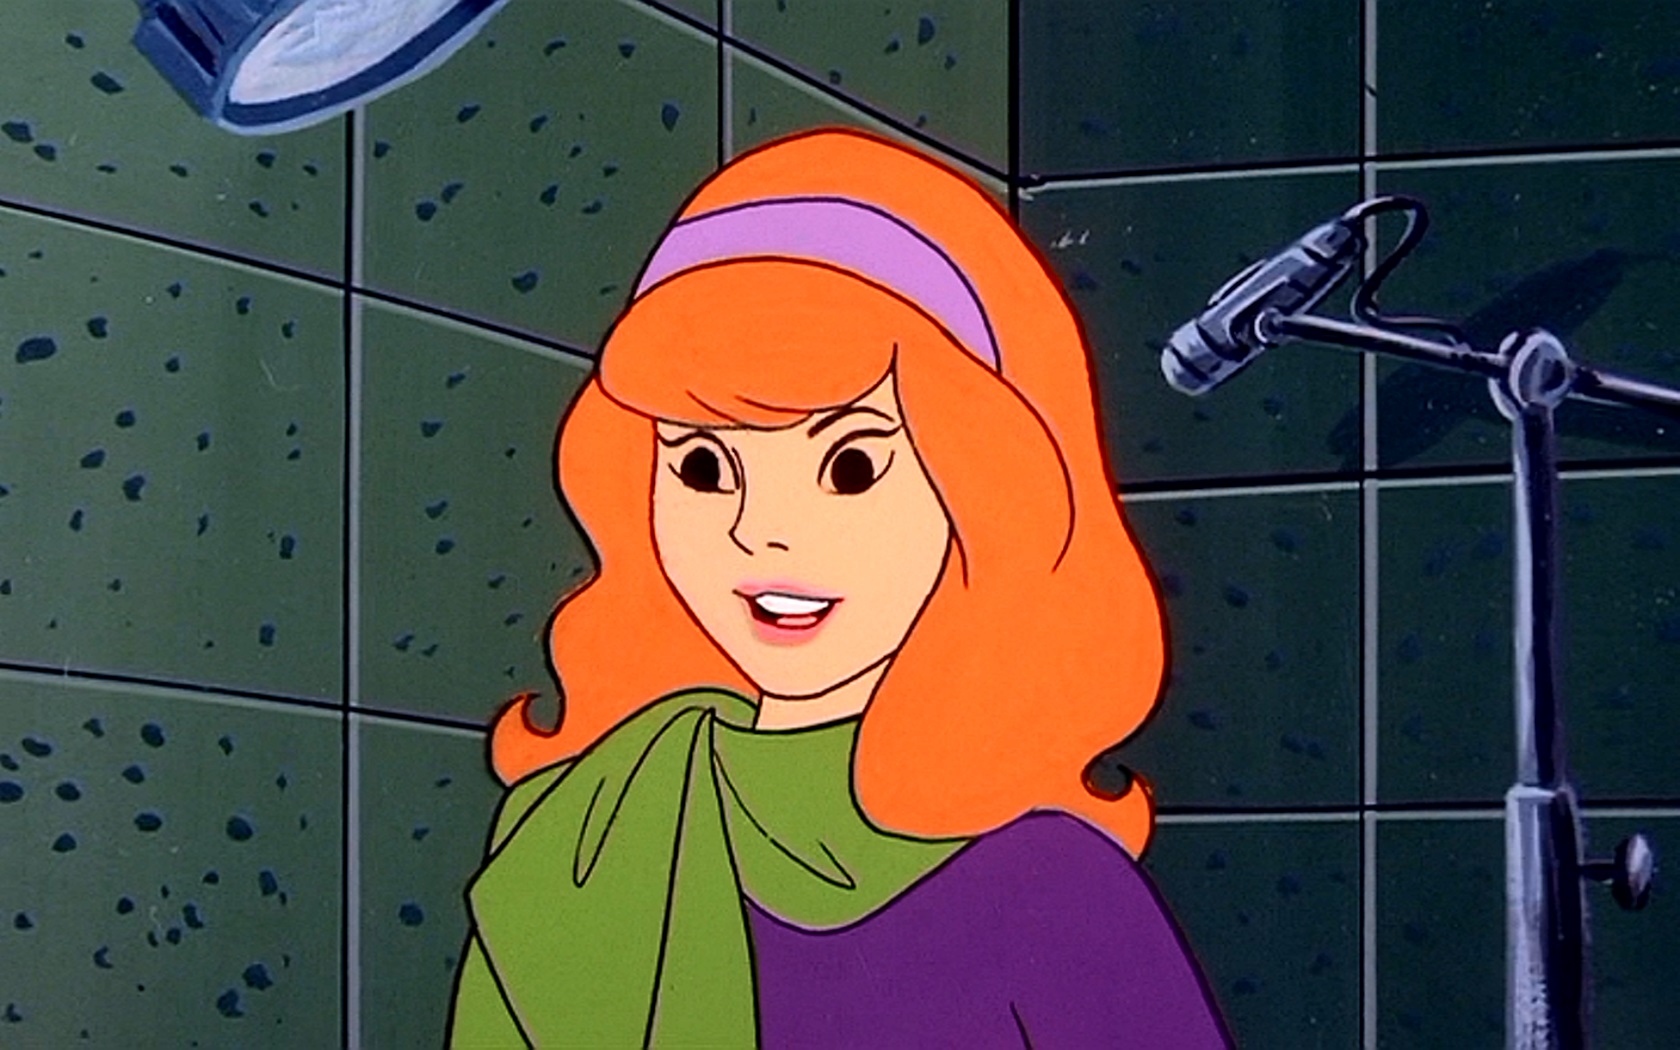 Pictures Of Daphne From Scooby Doo escorte norge